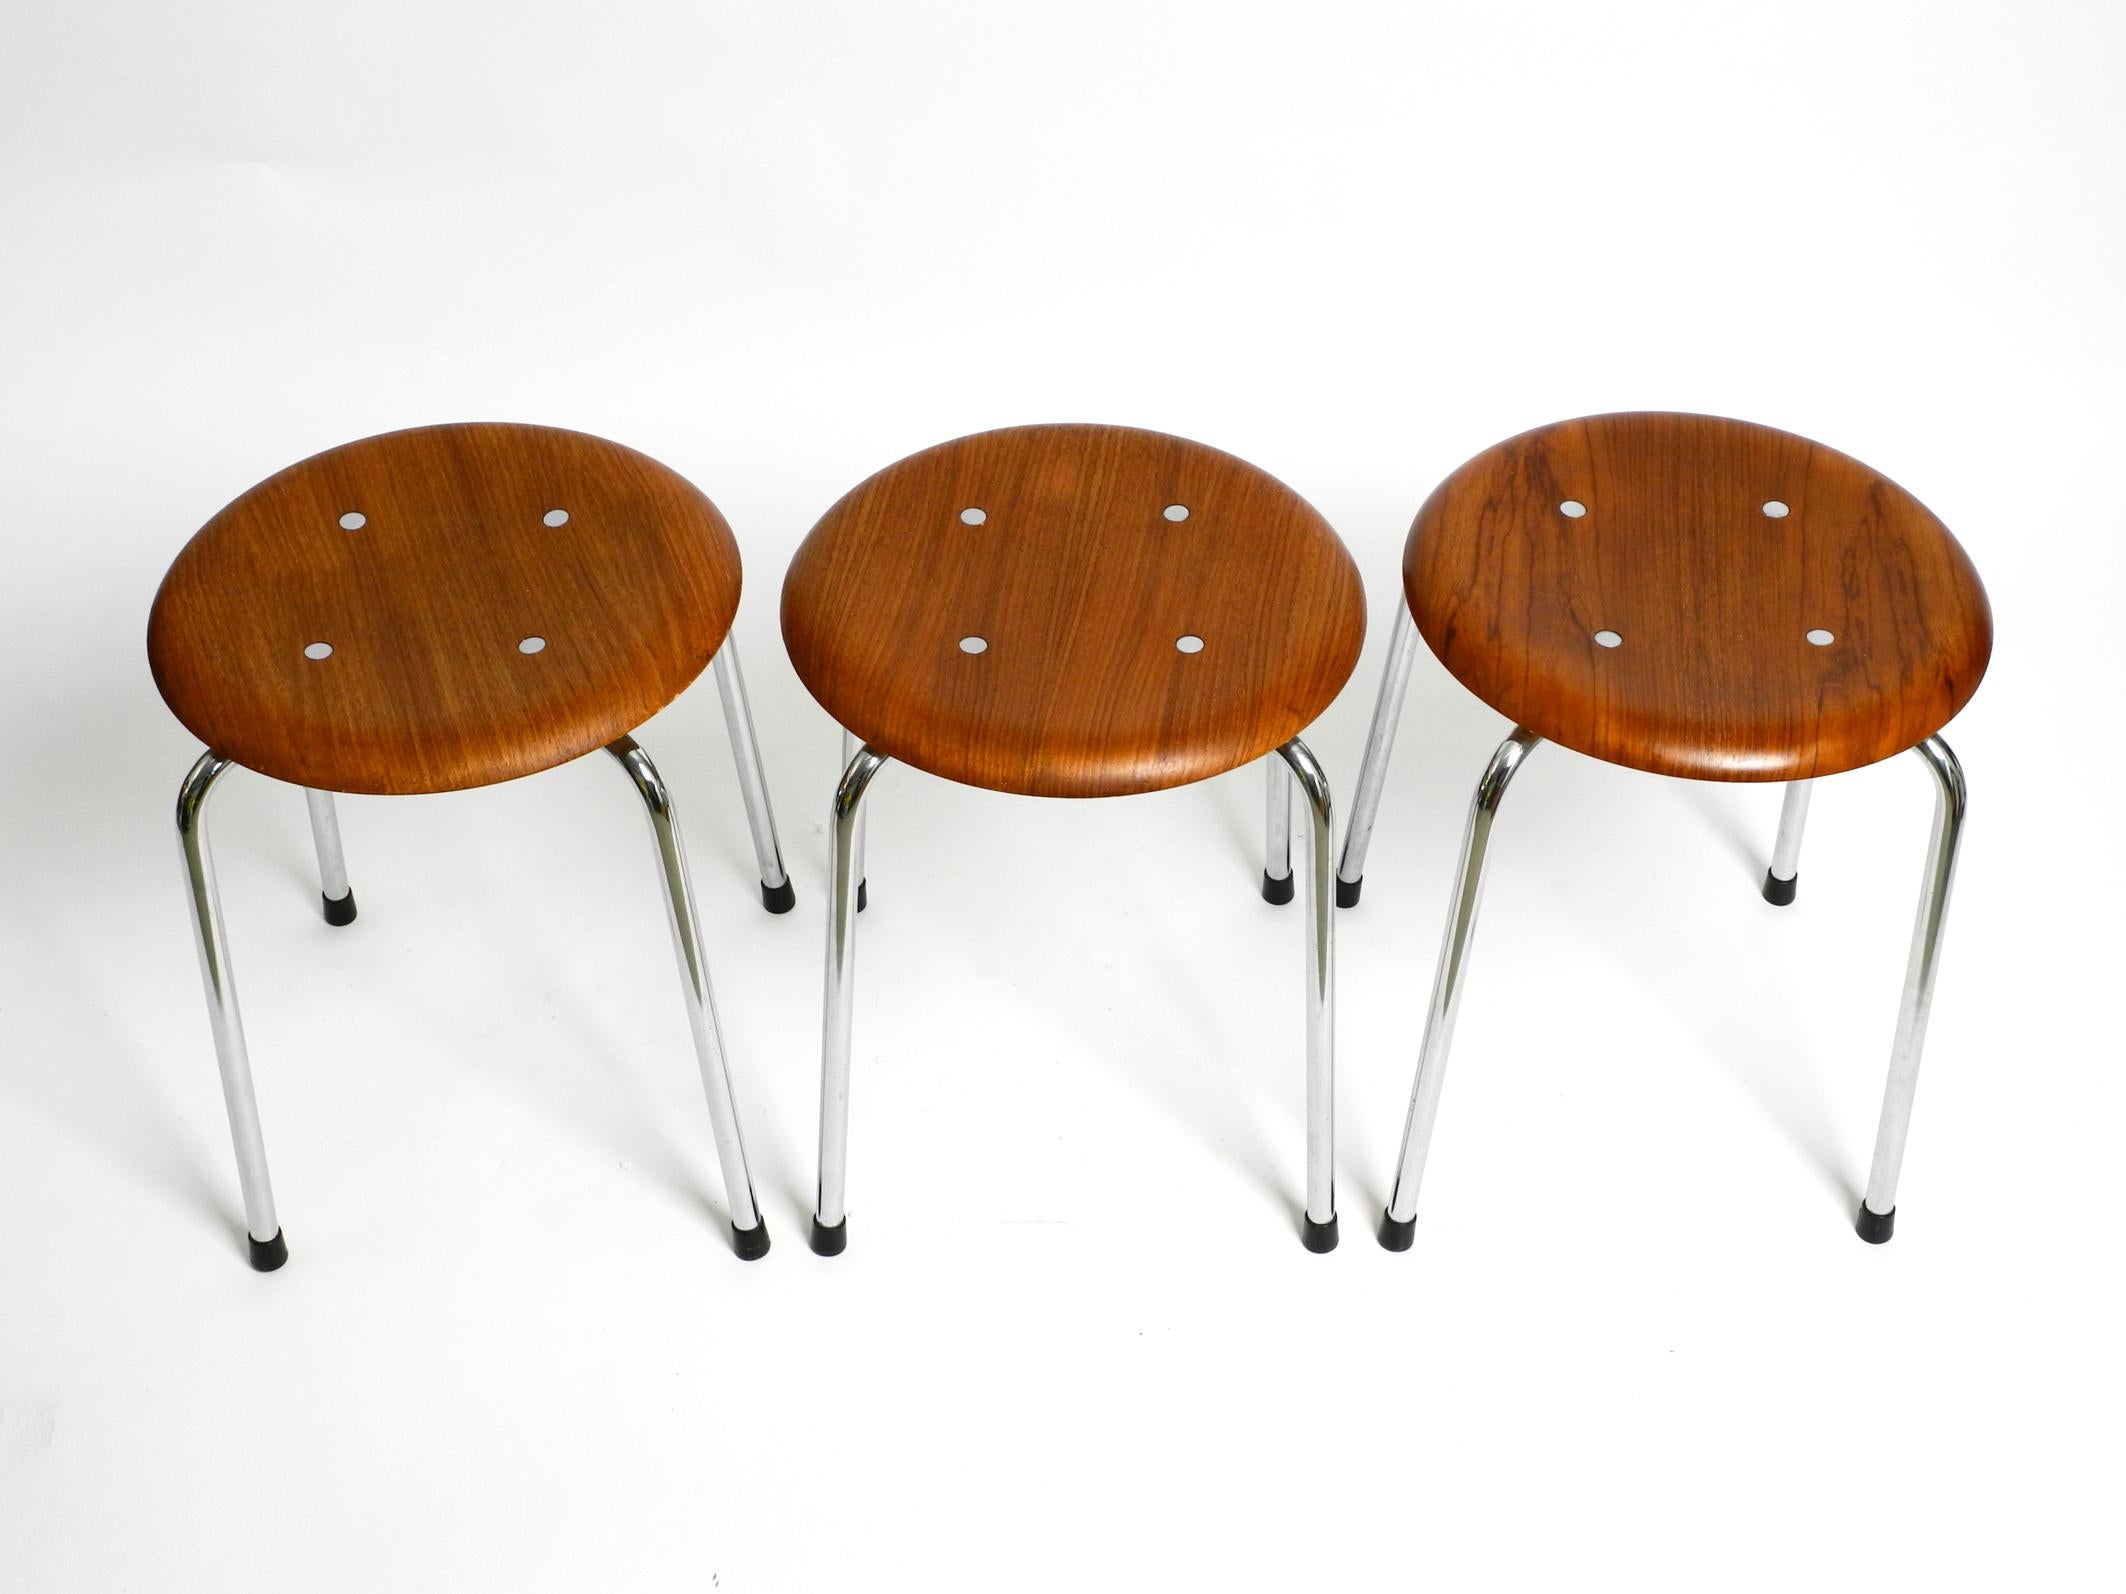 Three original Mid-Century Modern four-legged stackable teak stools. 
SE 38 by Egon Eiermann for Wilde + Spieth.
Egon Eiermann was an important world famous German post-war architect and furniture designer.
These stools were manufactured in the